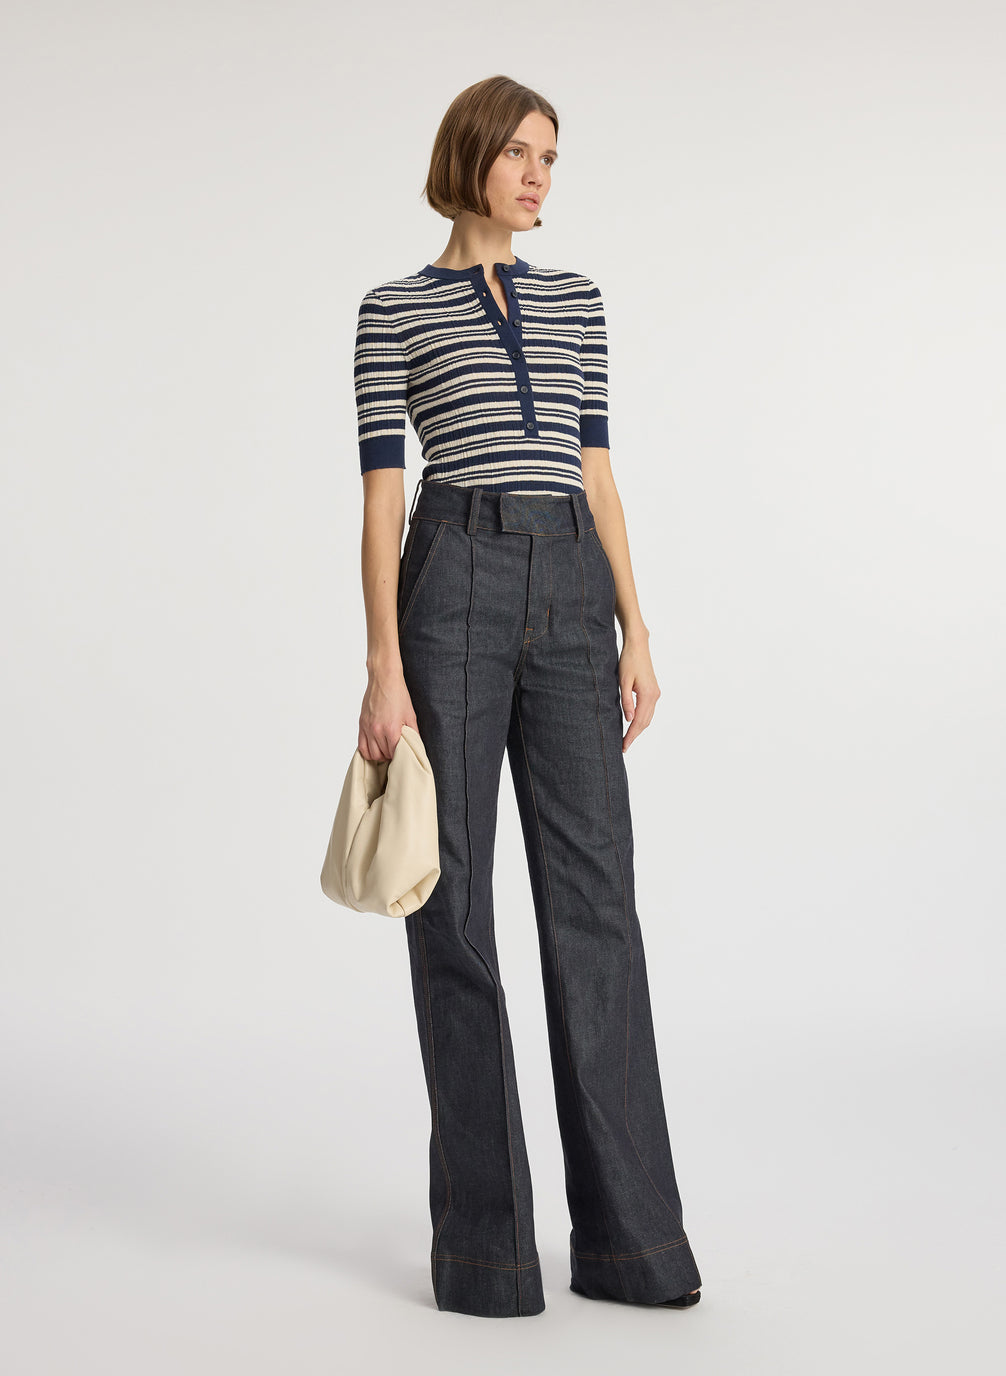 front  view of woman wearing navy blue striped half sleeve button placket shirt and dark wash raw denim jean